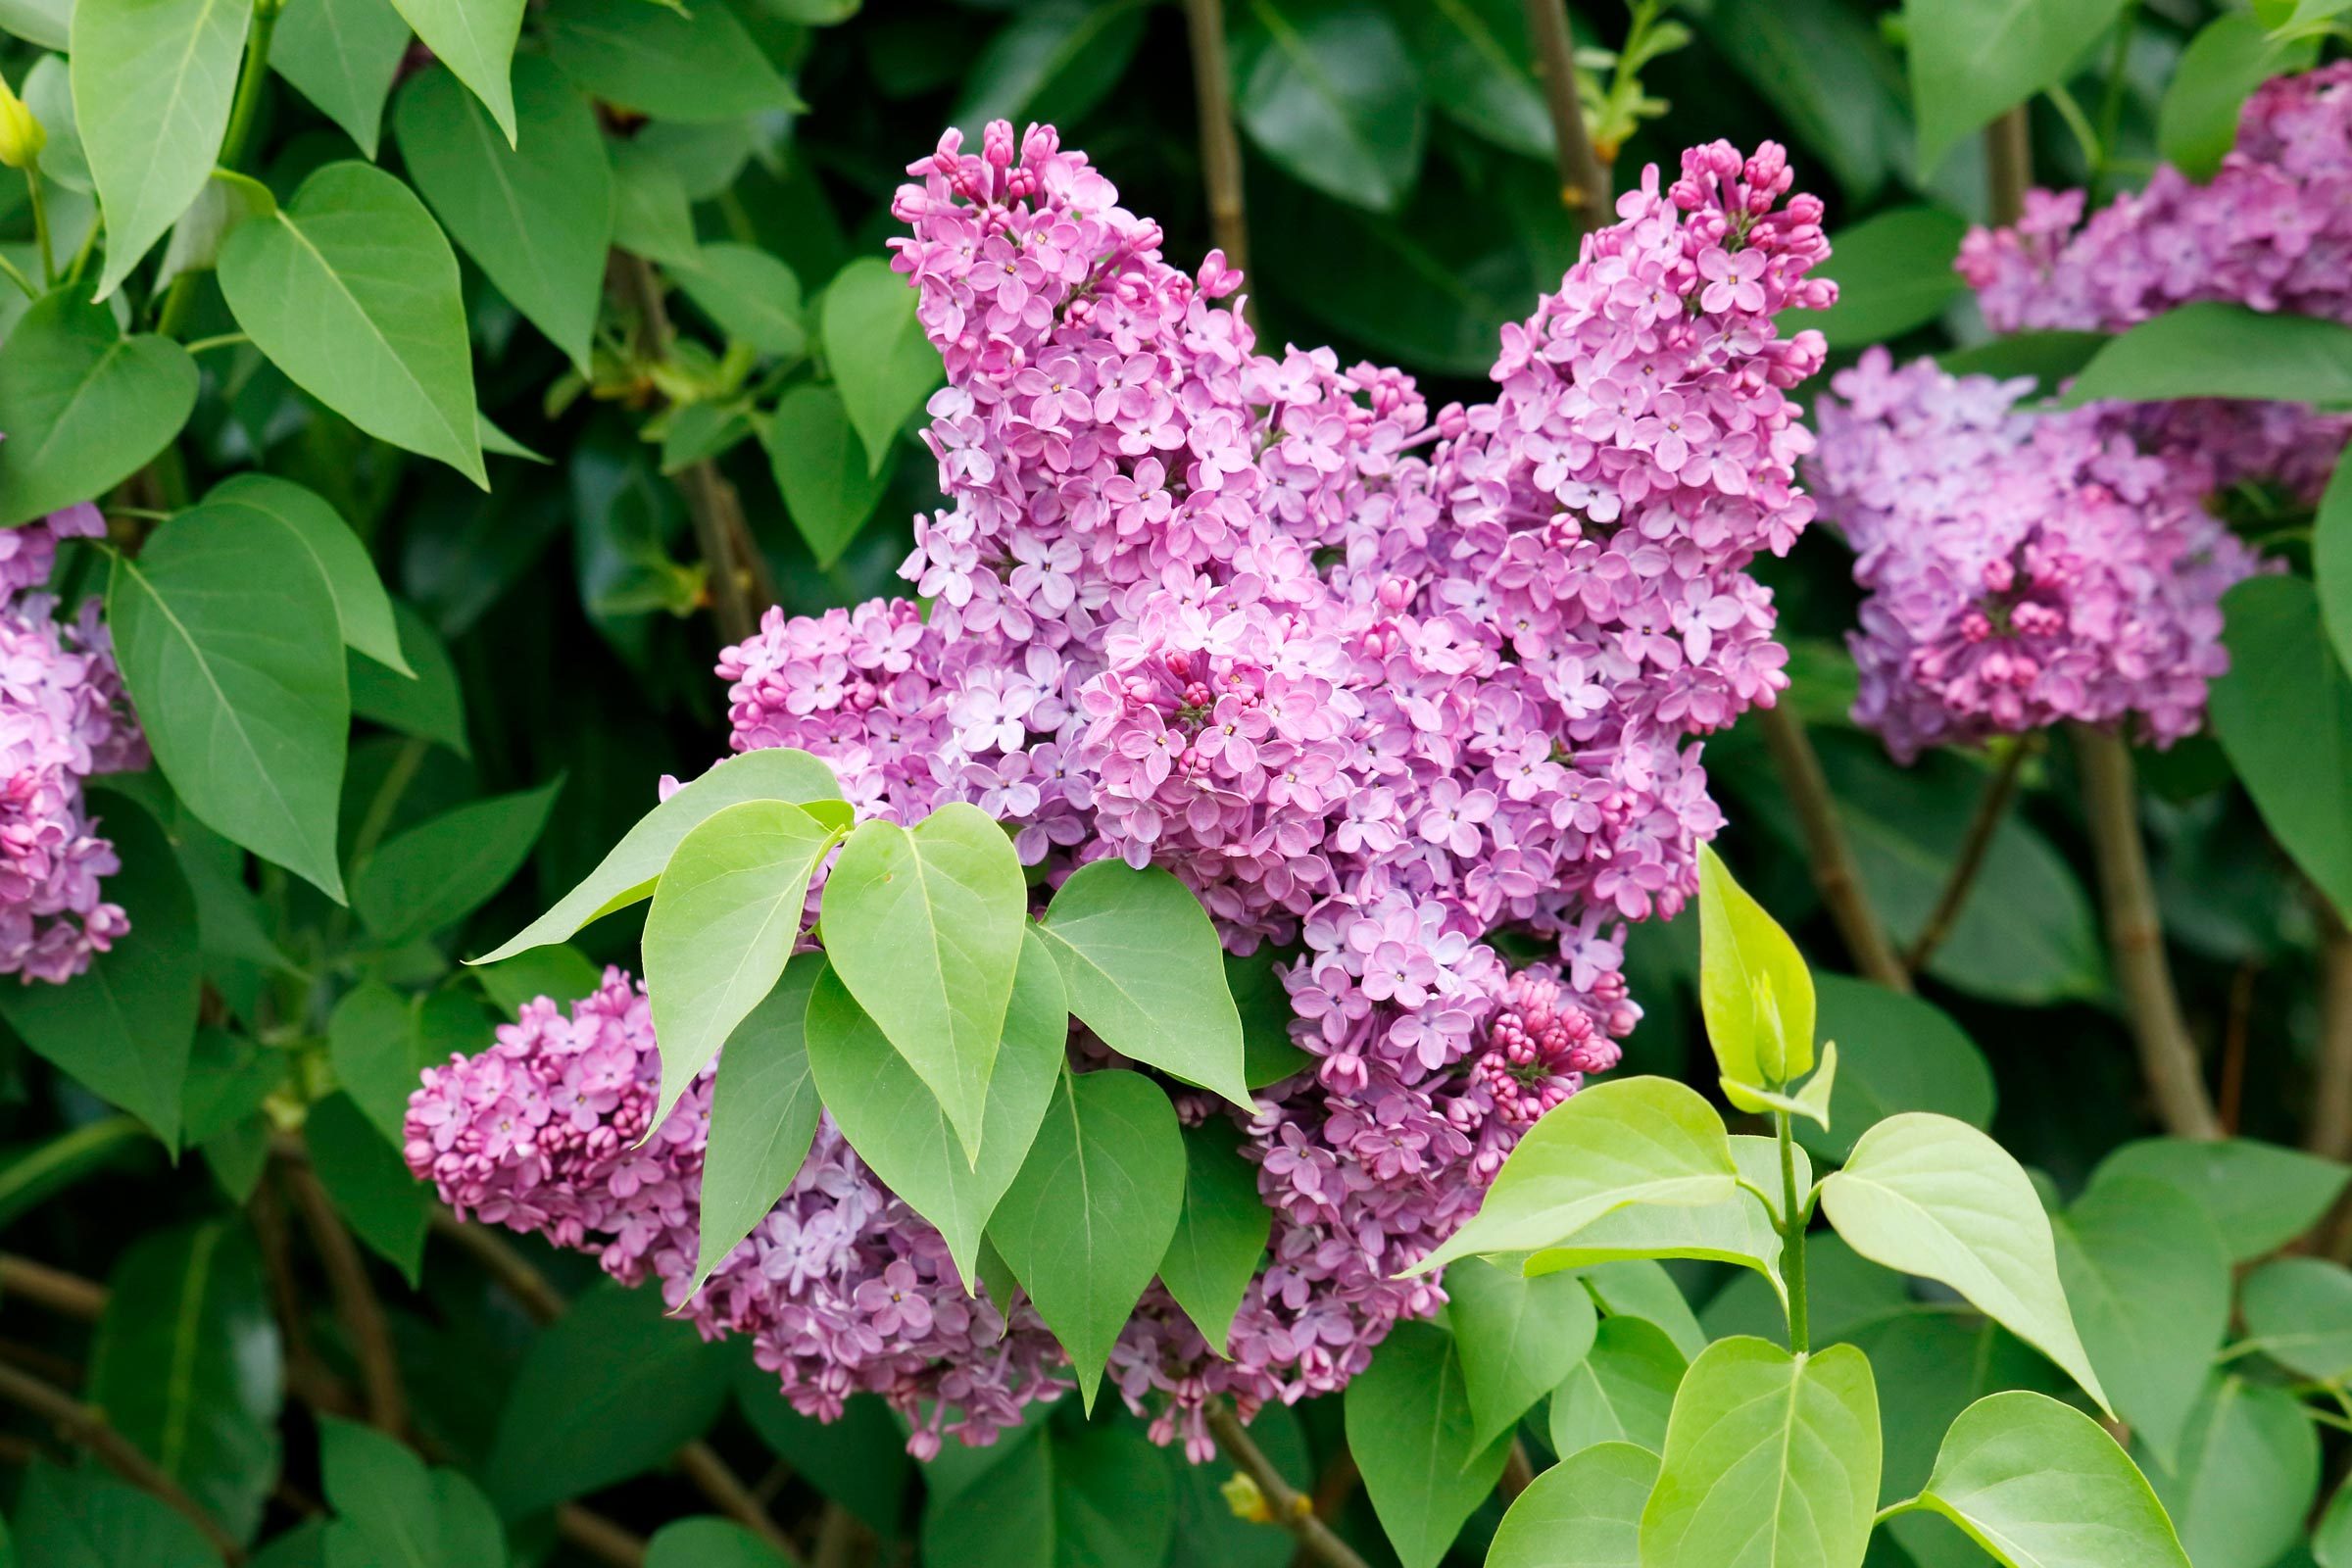 Top 6 Purple Flowers Meaning: Nobility, Spirituality, Imagination and More